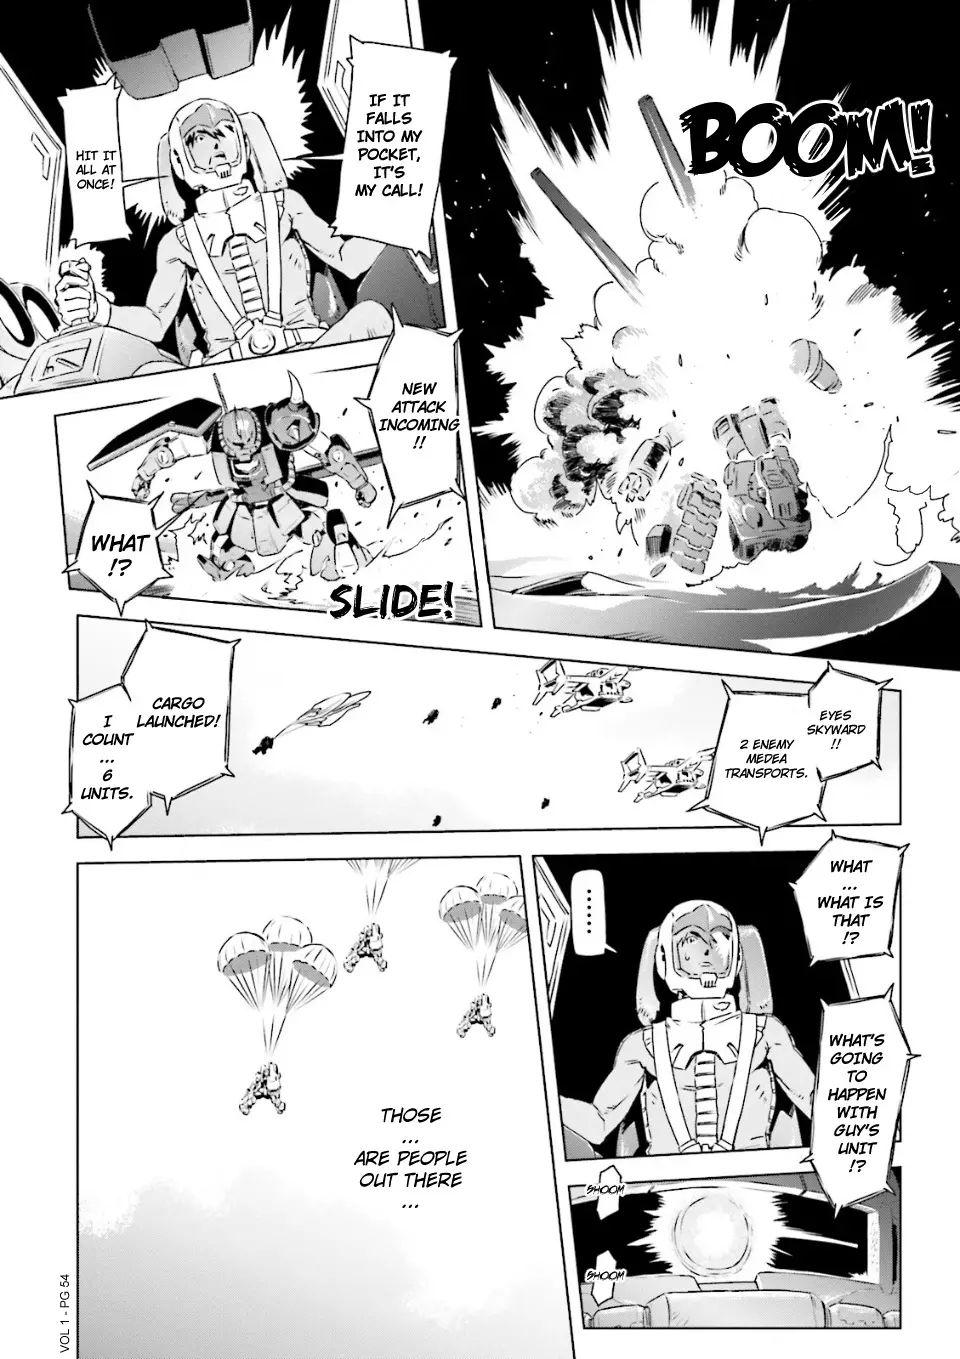 Mobile Suit Gundam Side Story - Missing Link - 2 page 16-6db31015